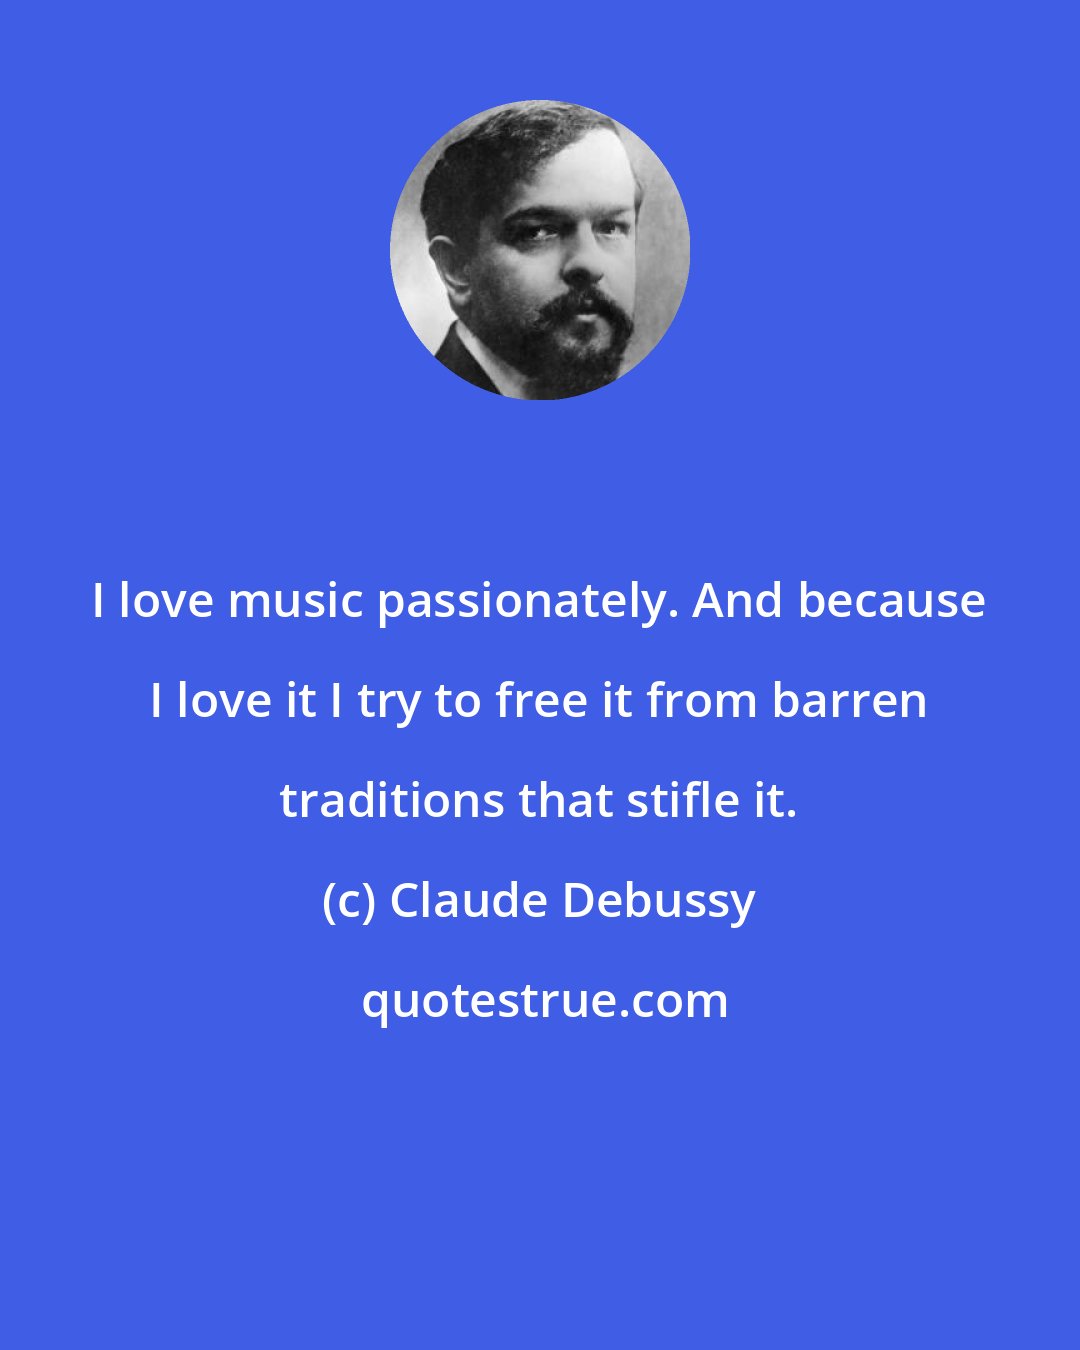 Claude Debussy: I love music passionately. And because I love it I try to free it from barren traditions that stifle it.